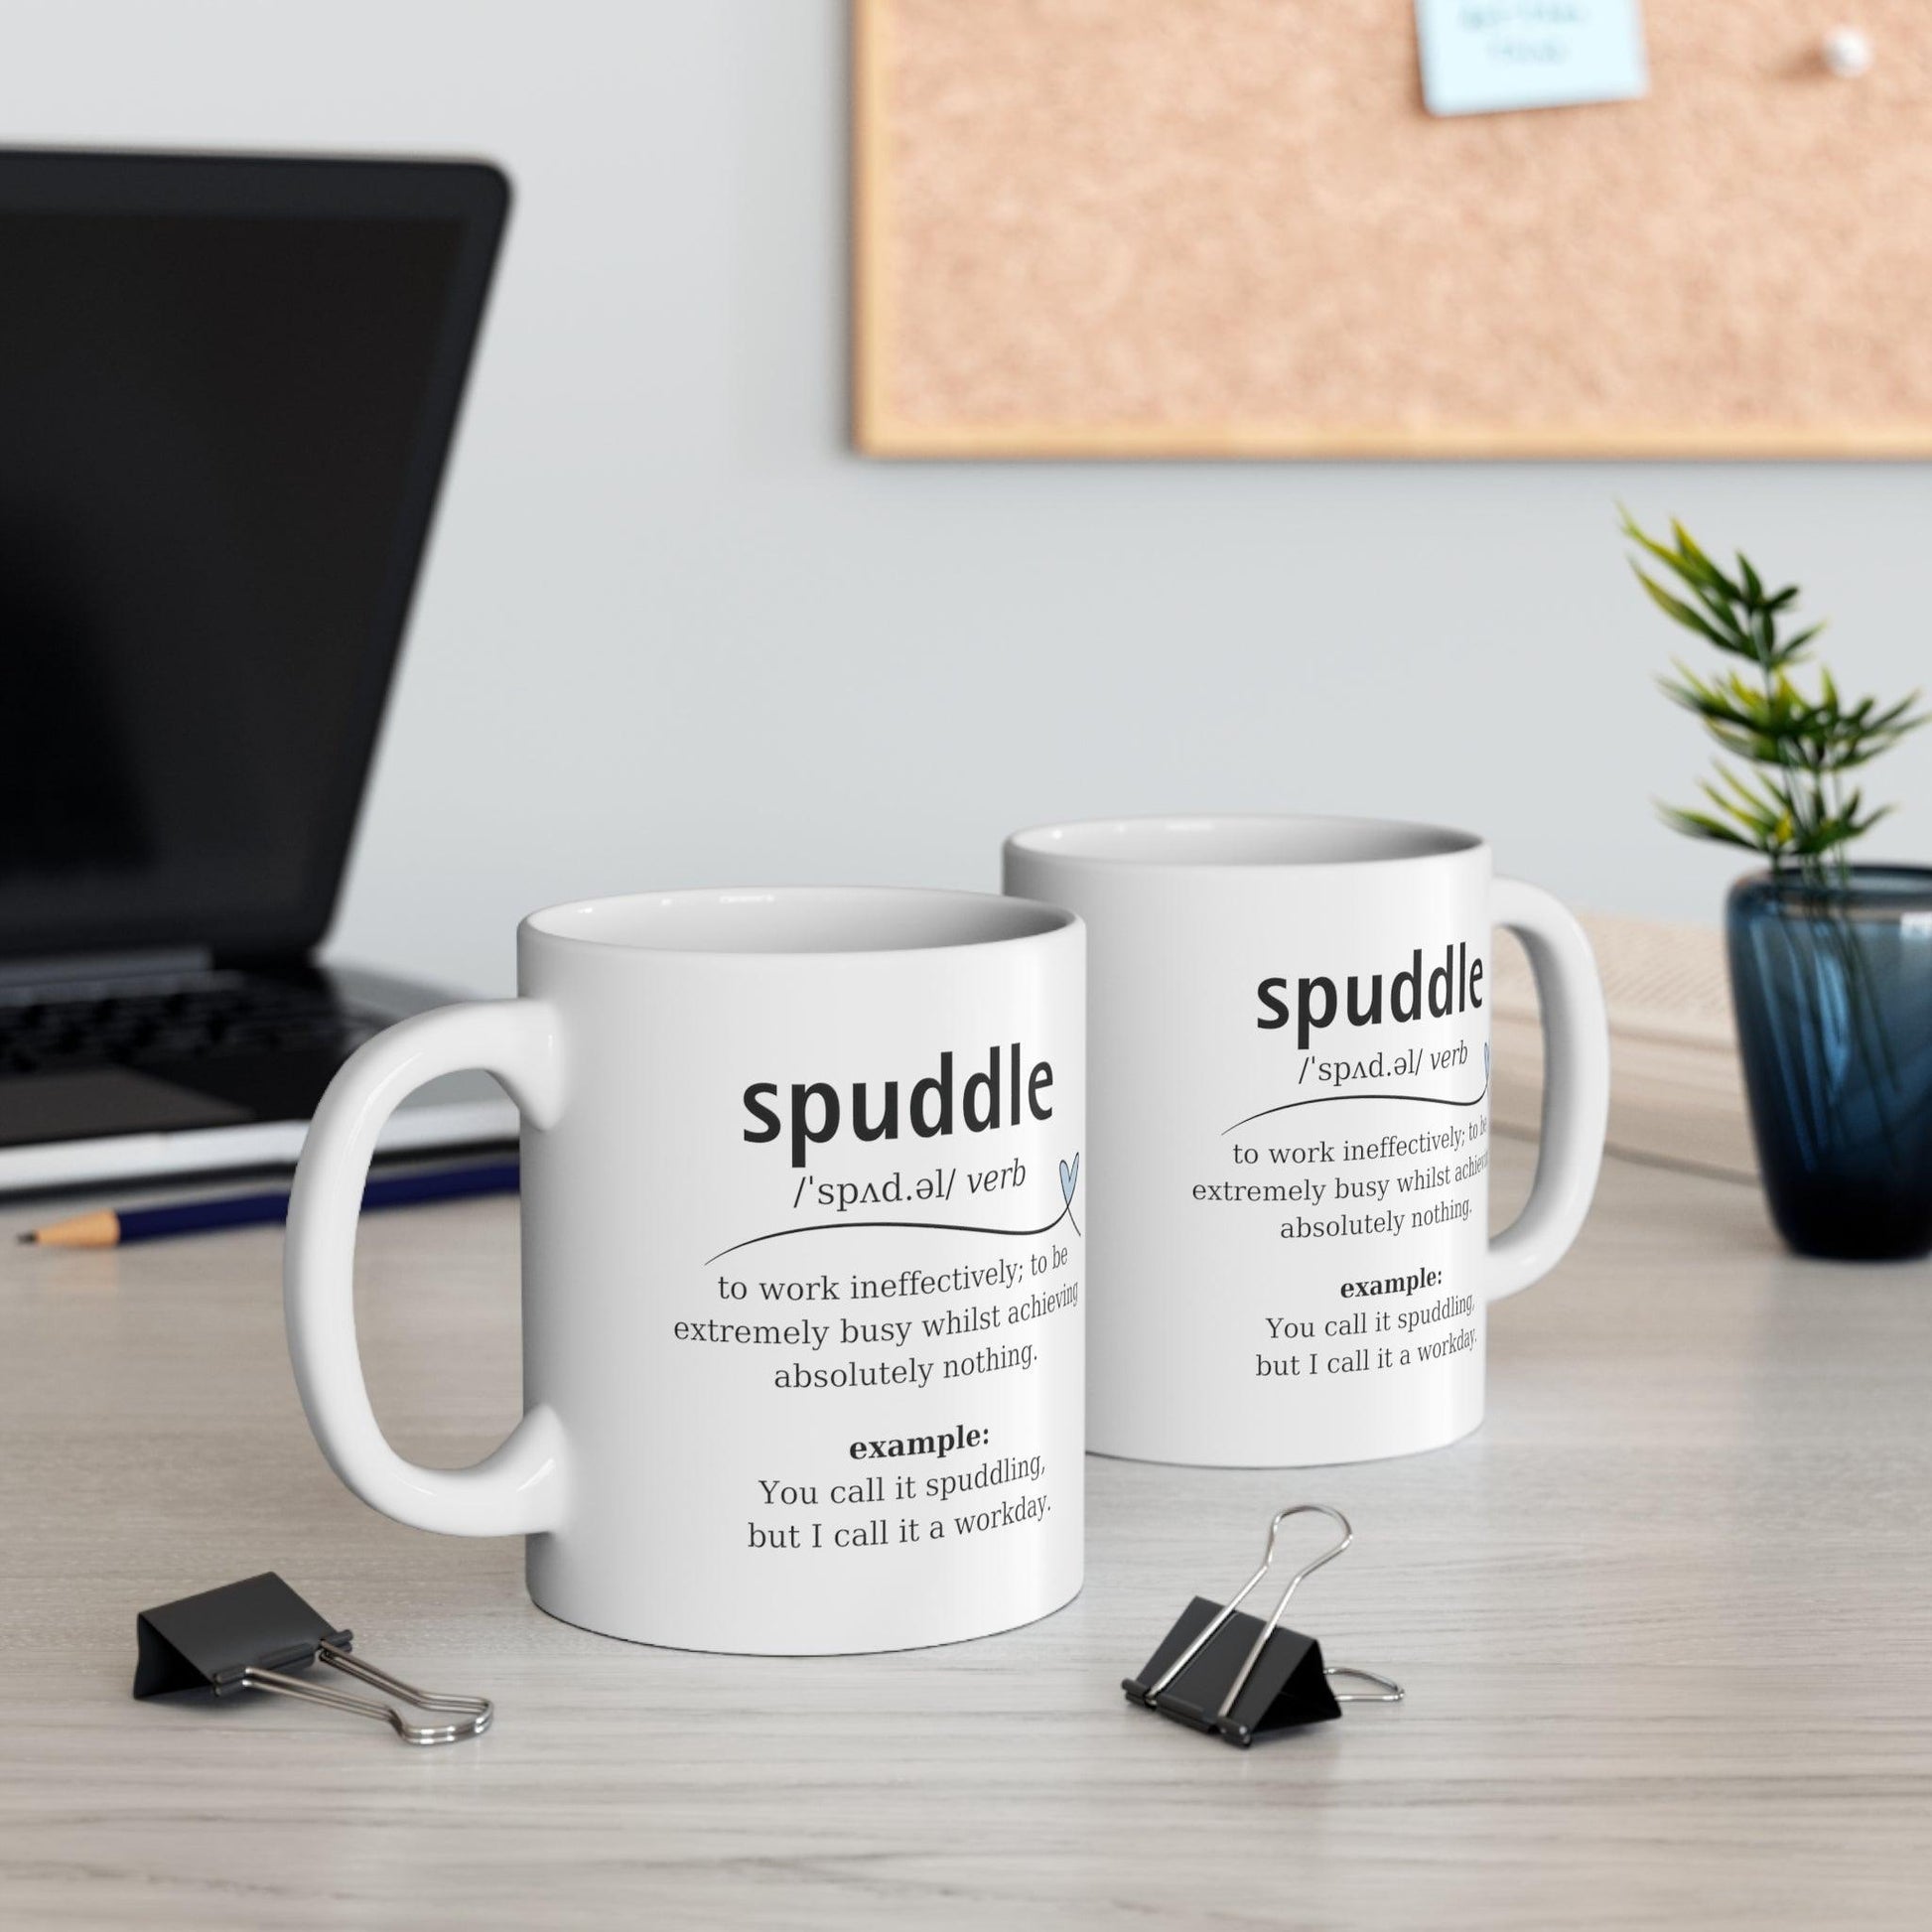 'Spuddle' Definition Mug - Embrace Unfocused Days - ADHD gift cup - Fidget and Focus